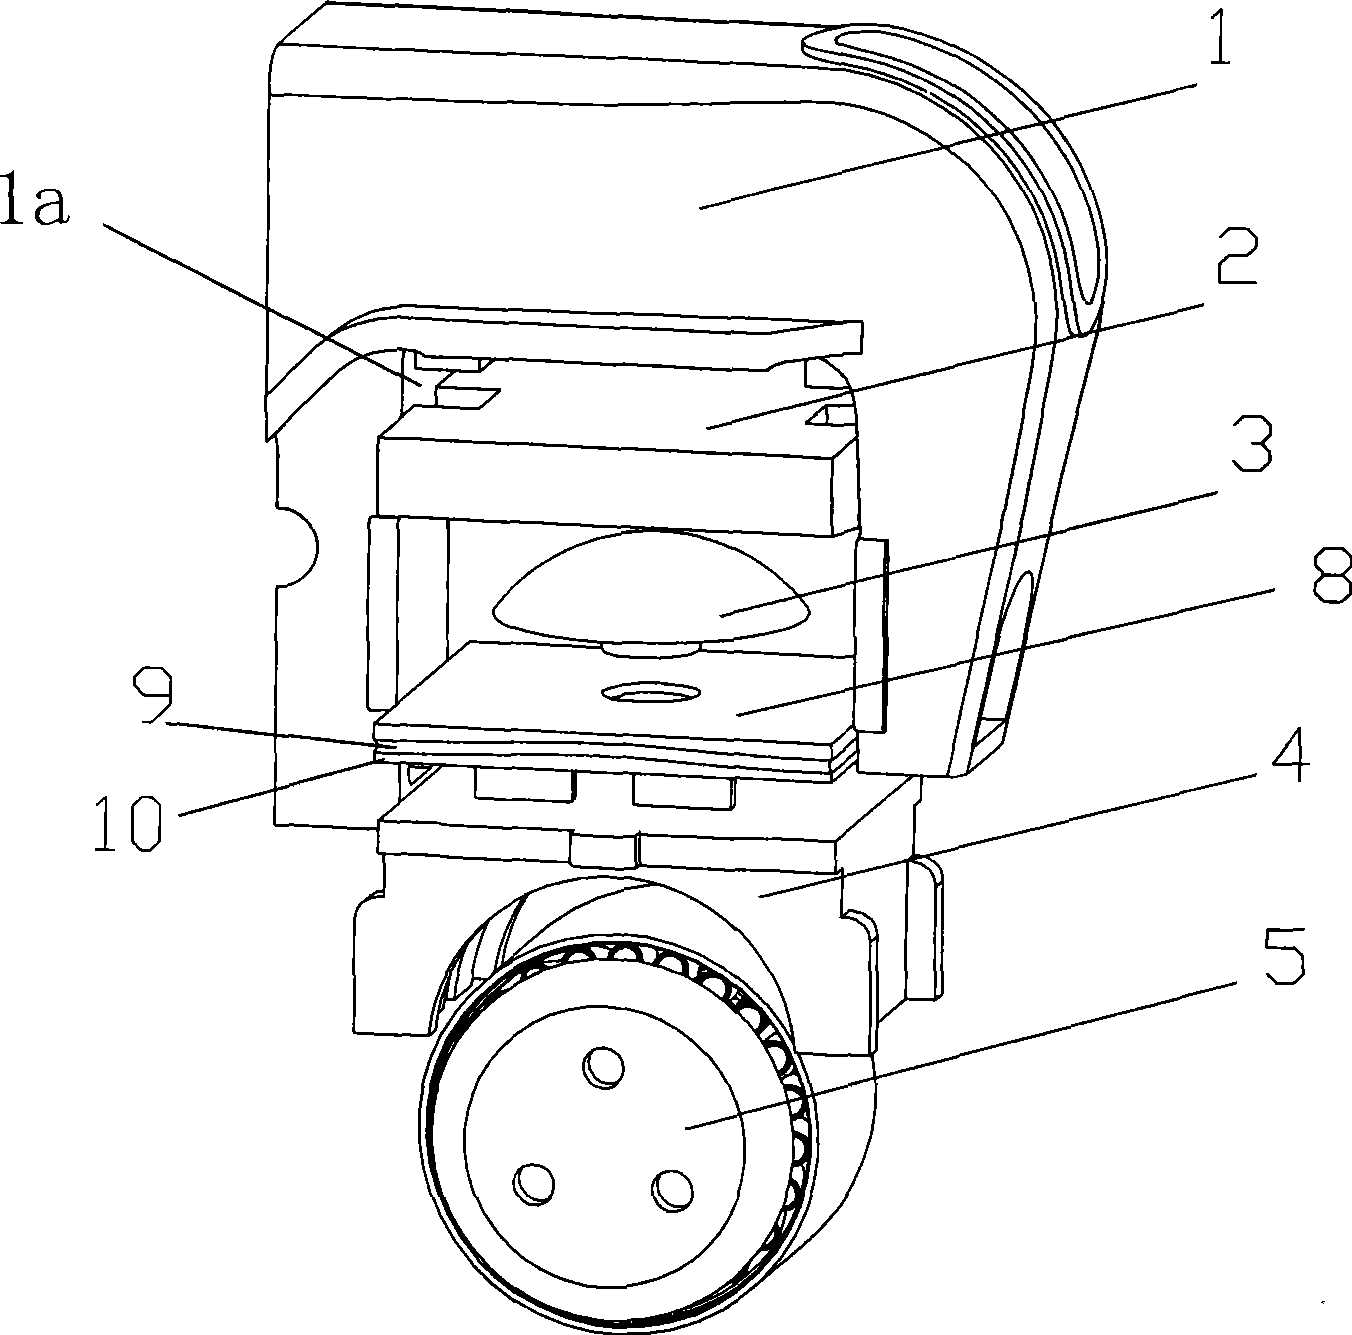 Auxiliary bearing saddle assembly for spherical cap of pendulum goods train